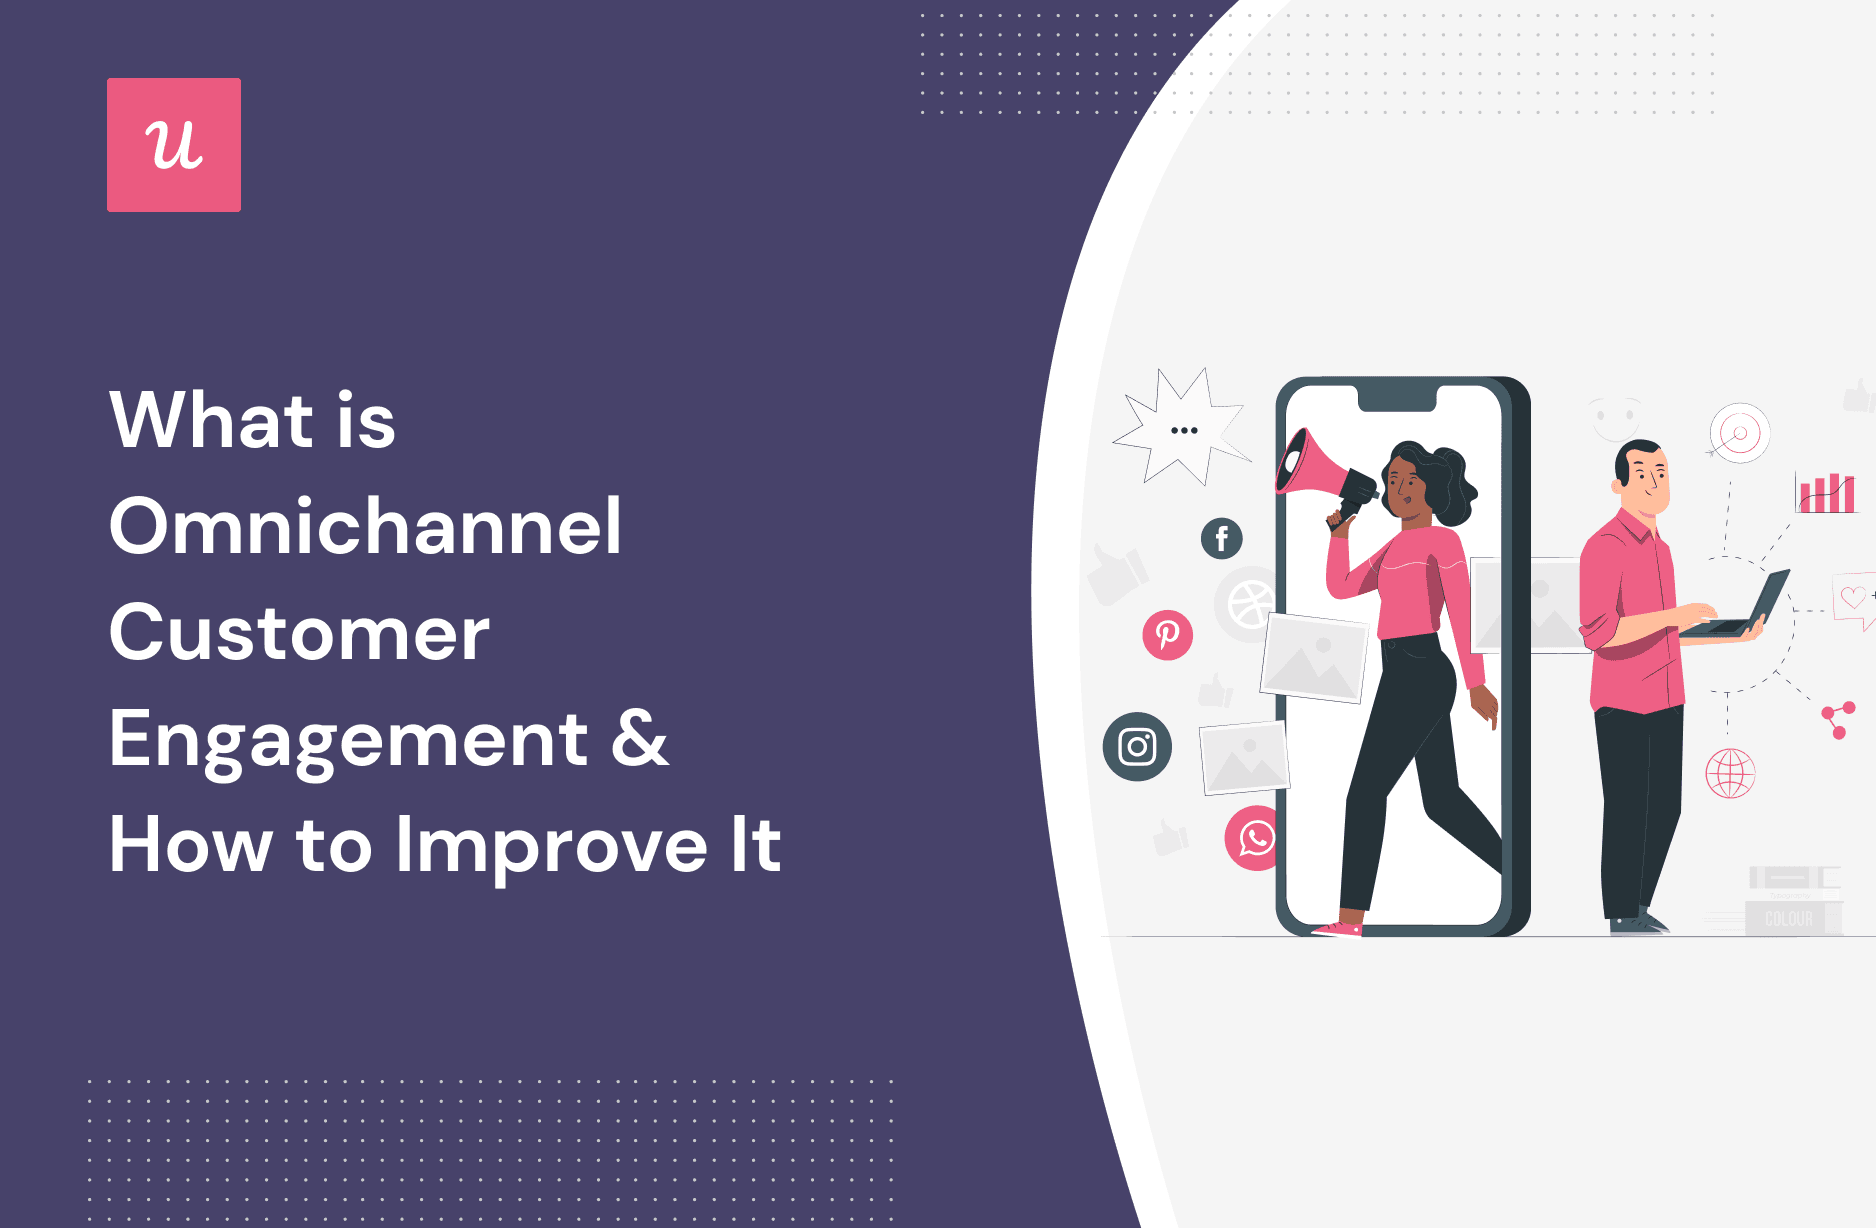 What is Omnichannel Customer Engagement & How to Improve It cover